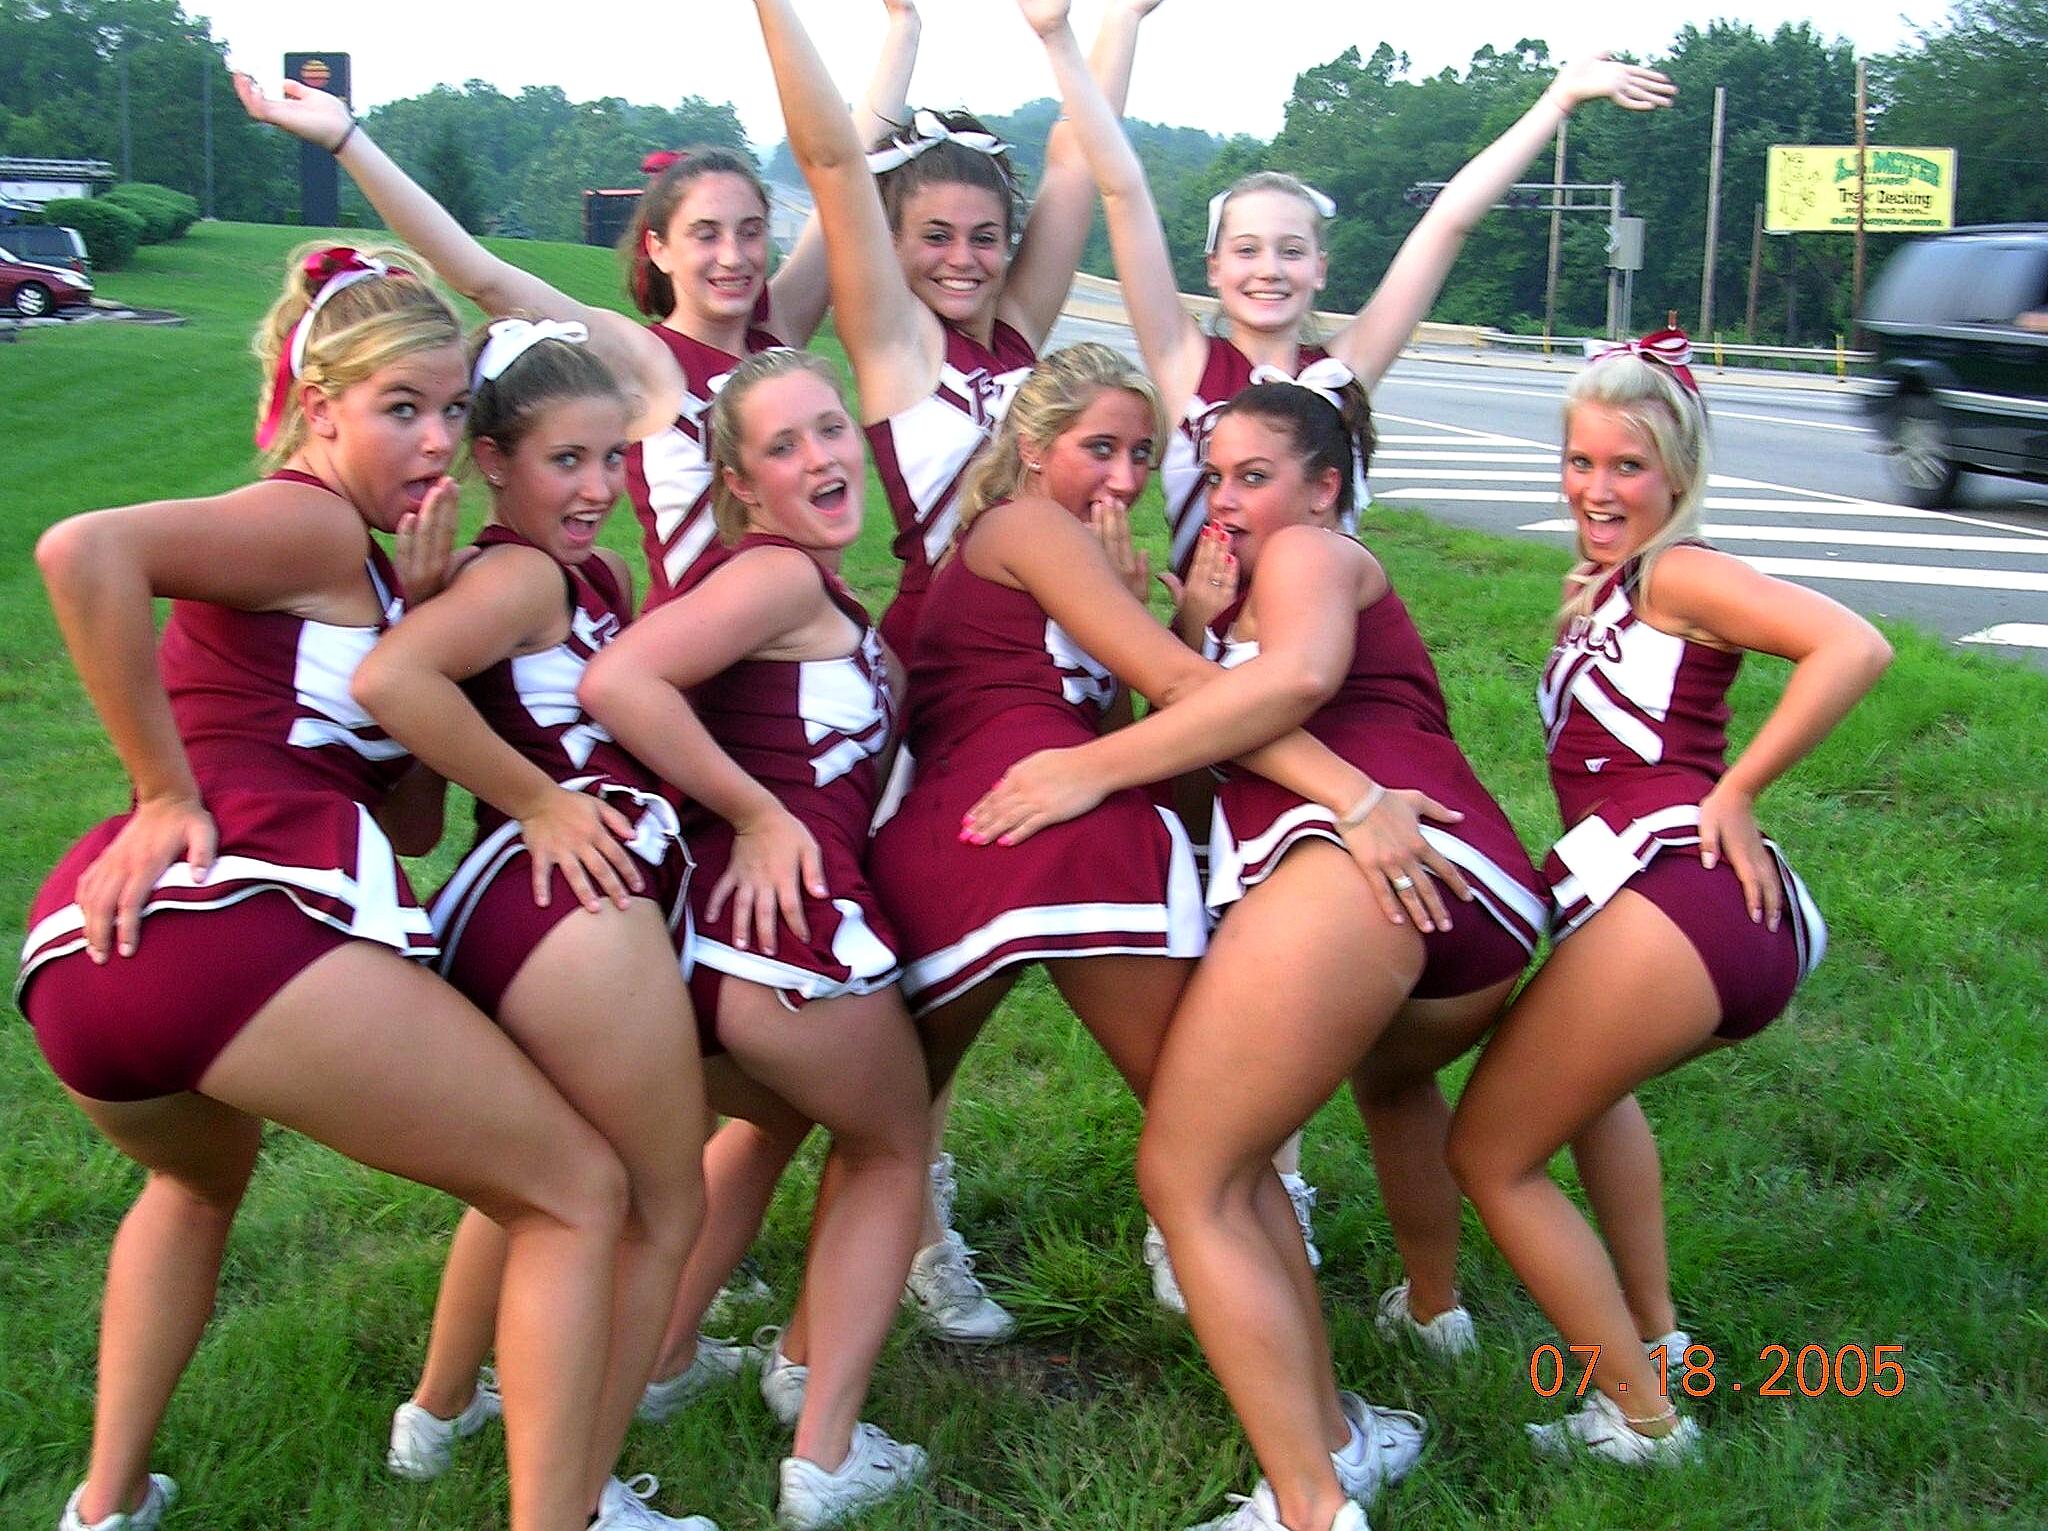 Nude Pictures Of Cheer Leading Squad